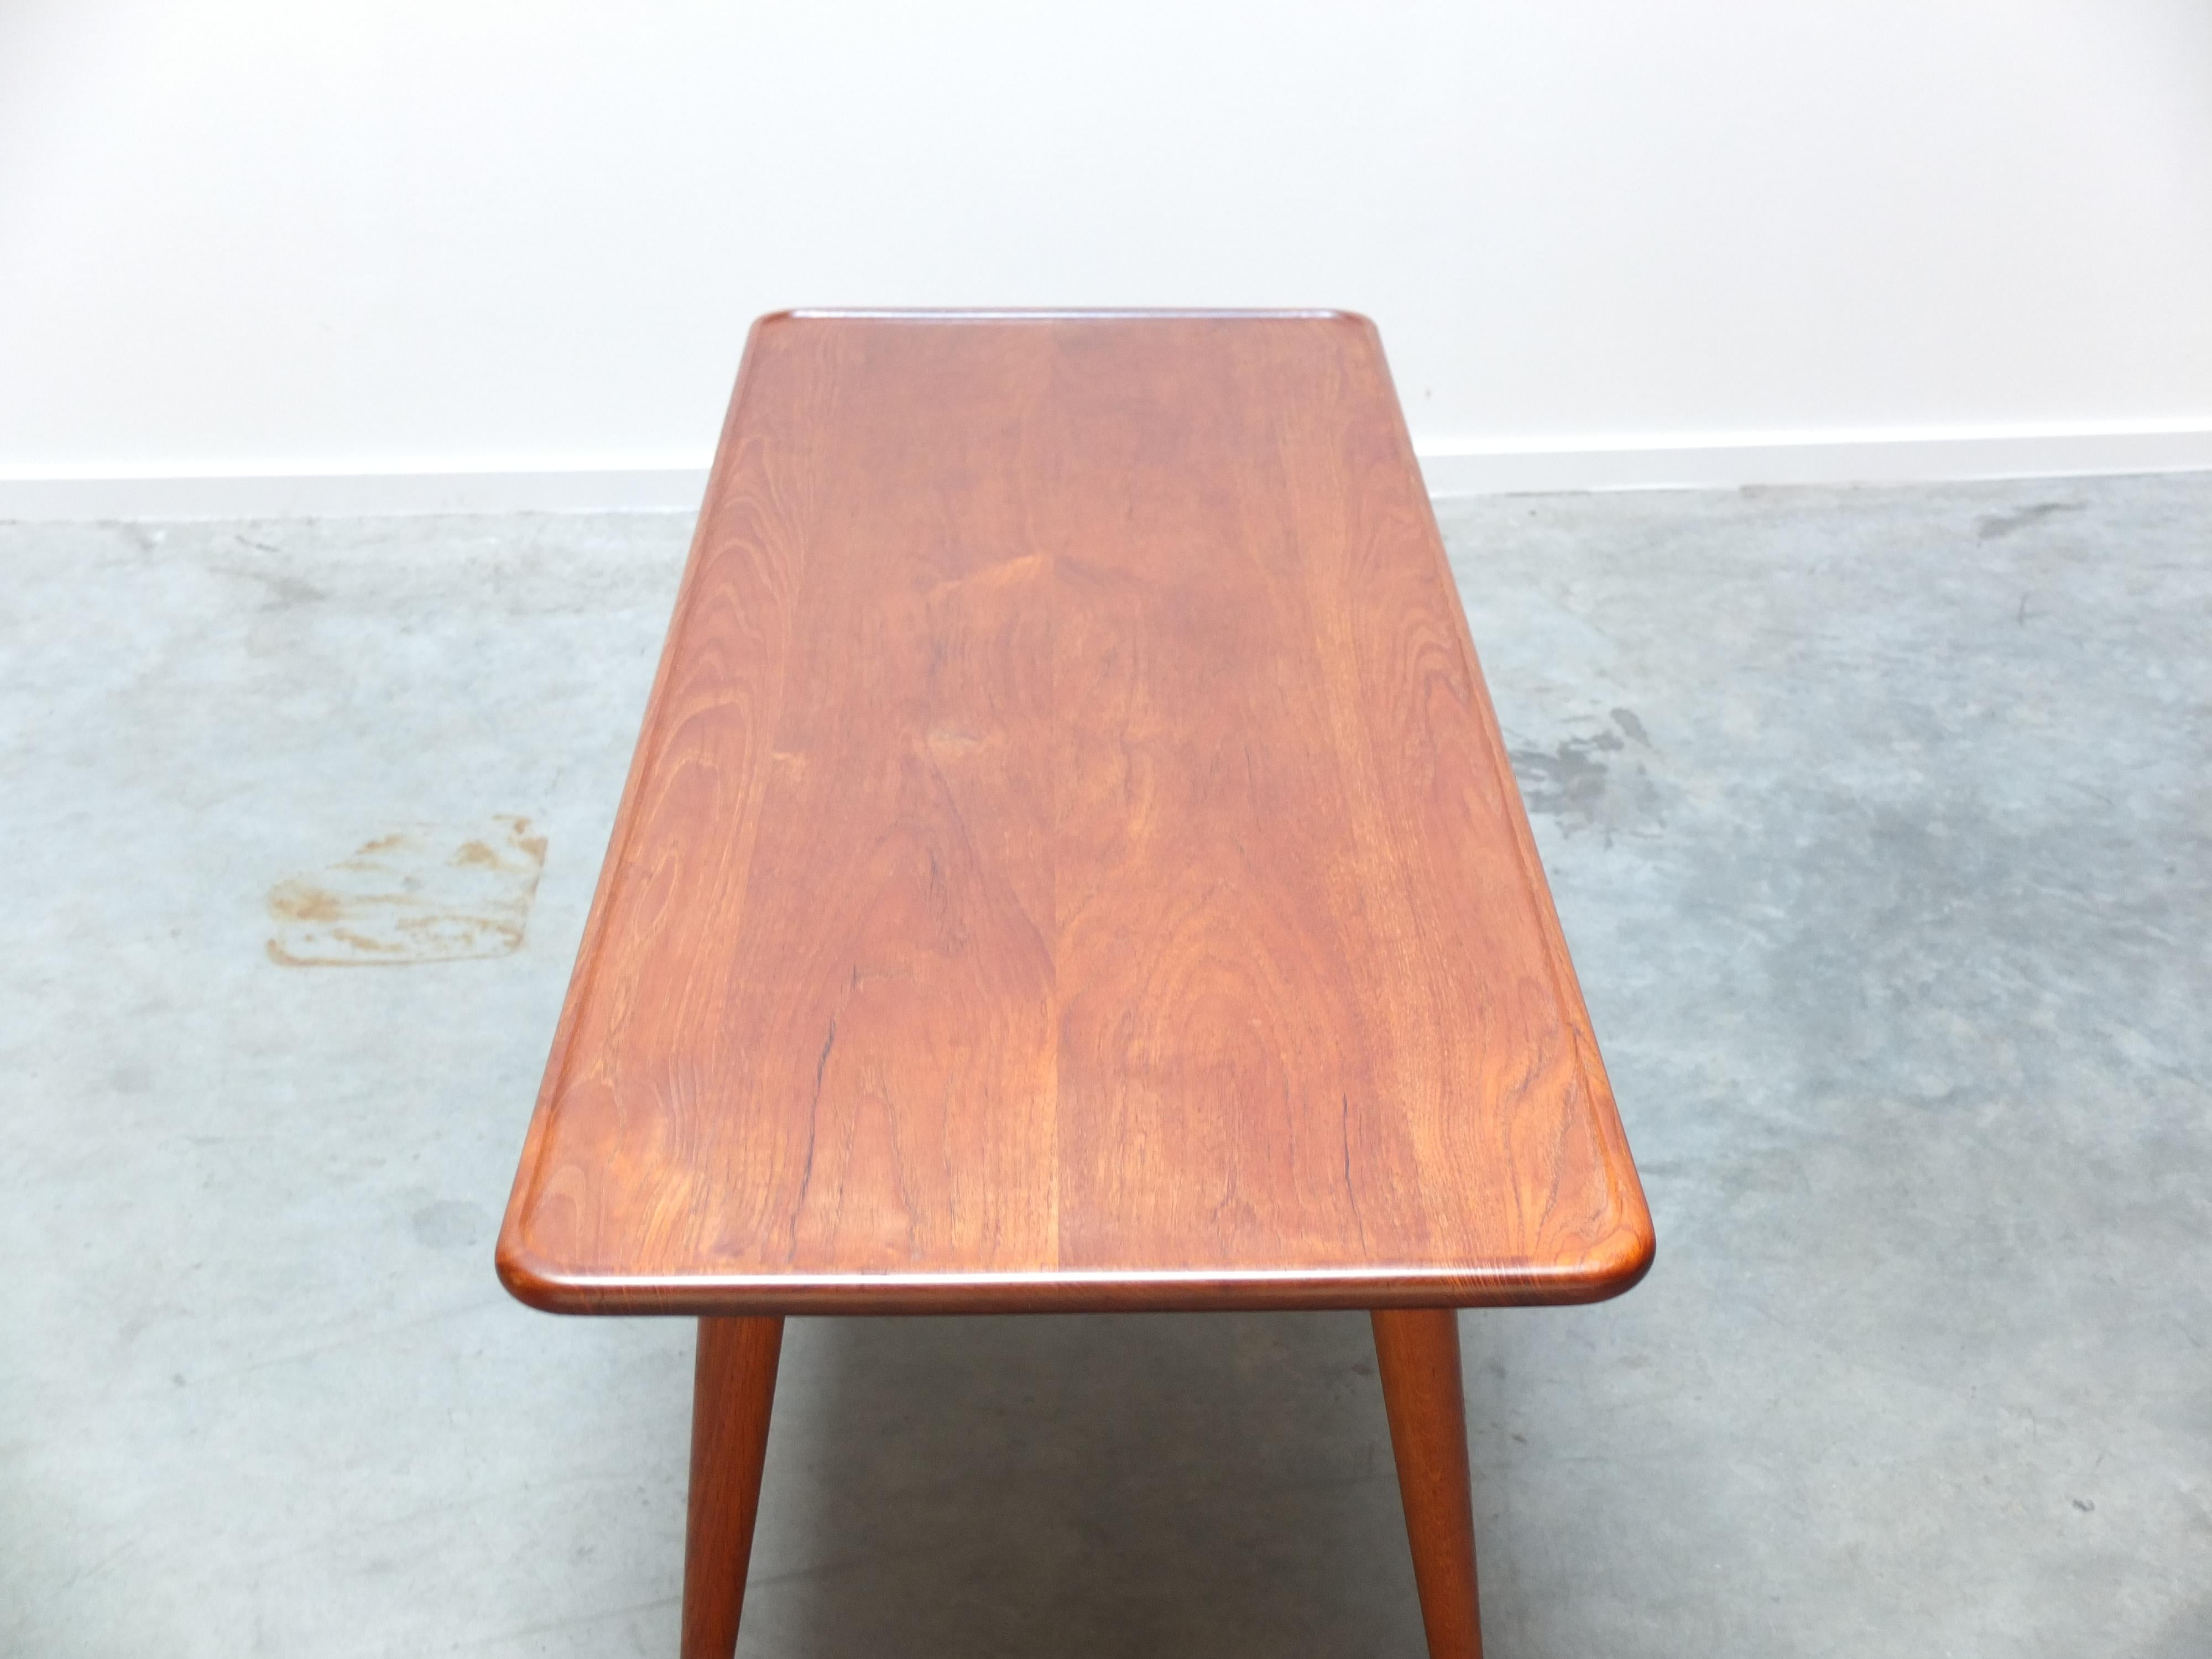 Teak & Oak 'At-11' Coffee Table by Hans Wegner for Andreas Tuck, 1950s For Sale 11